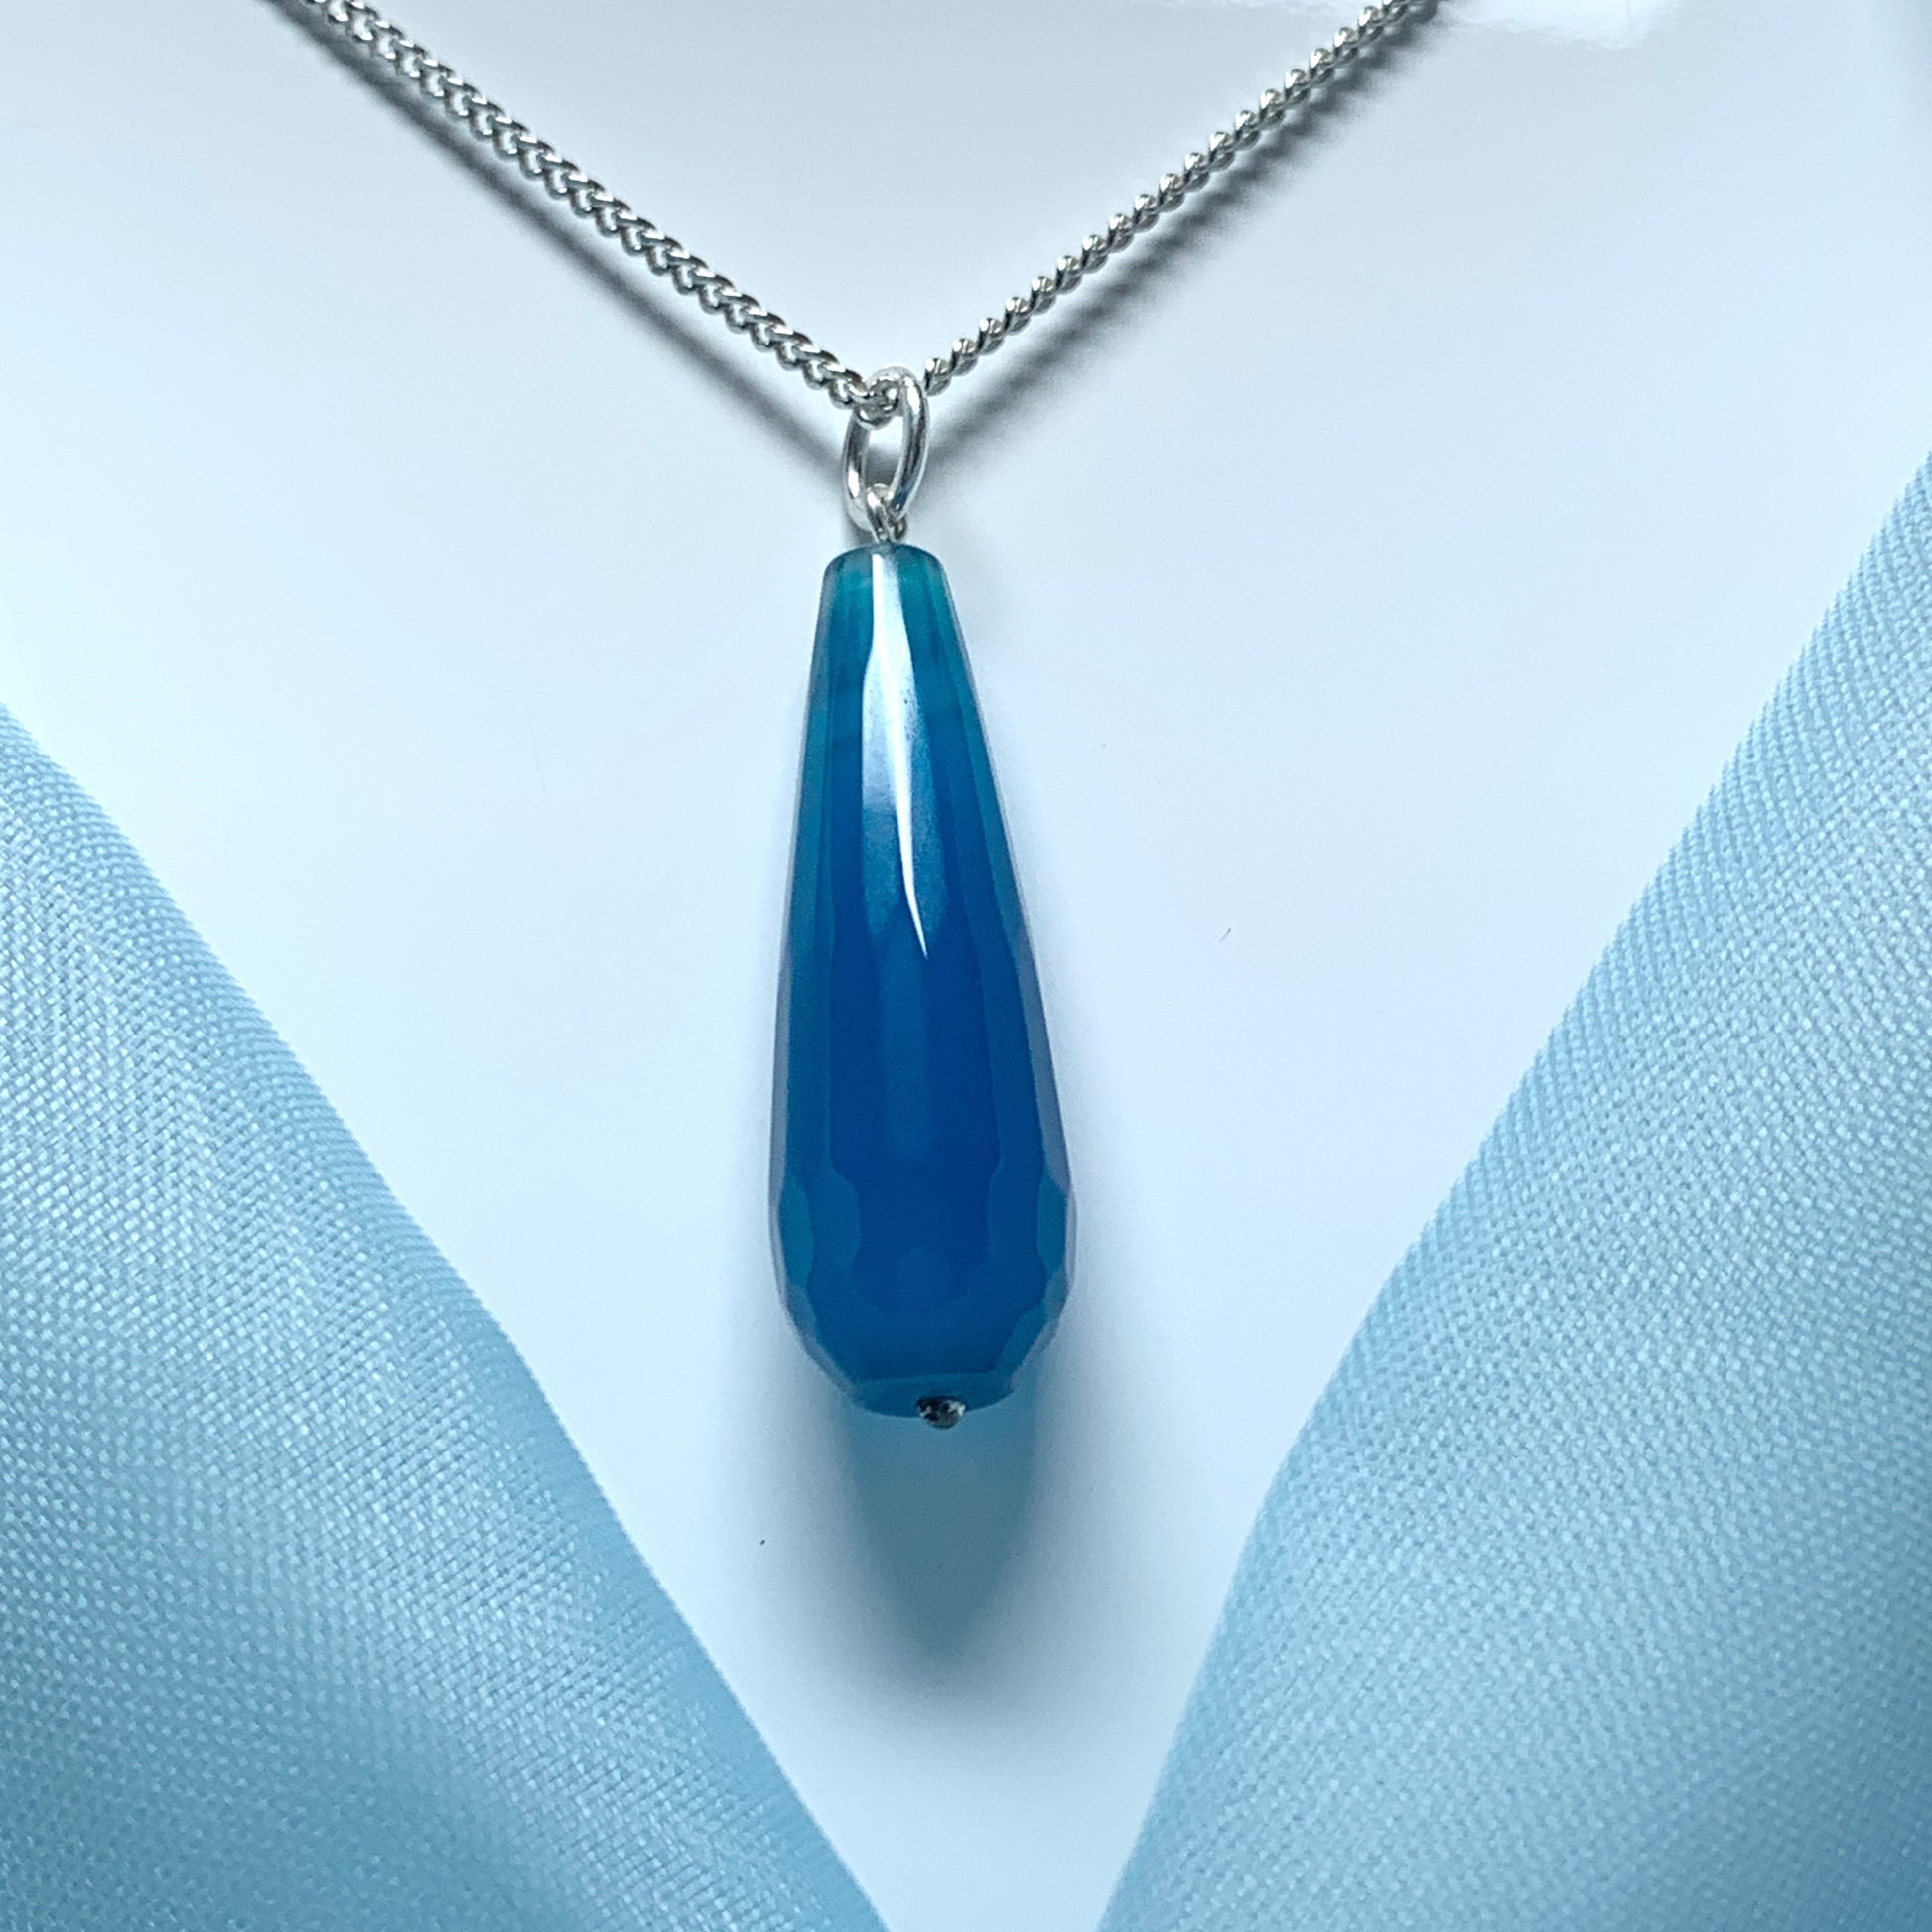 Dark blue agate pear shaped teardrop necklace pendent sterling silver